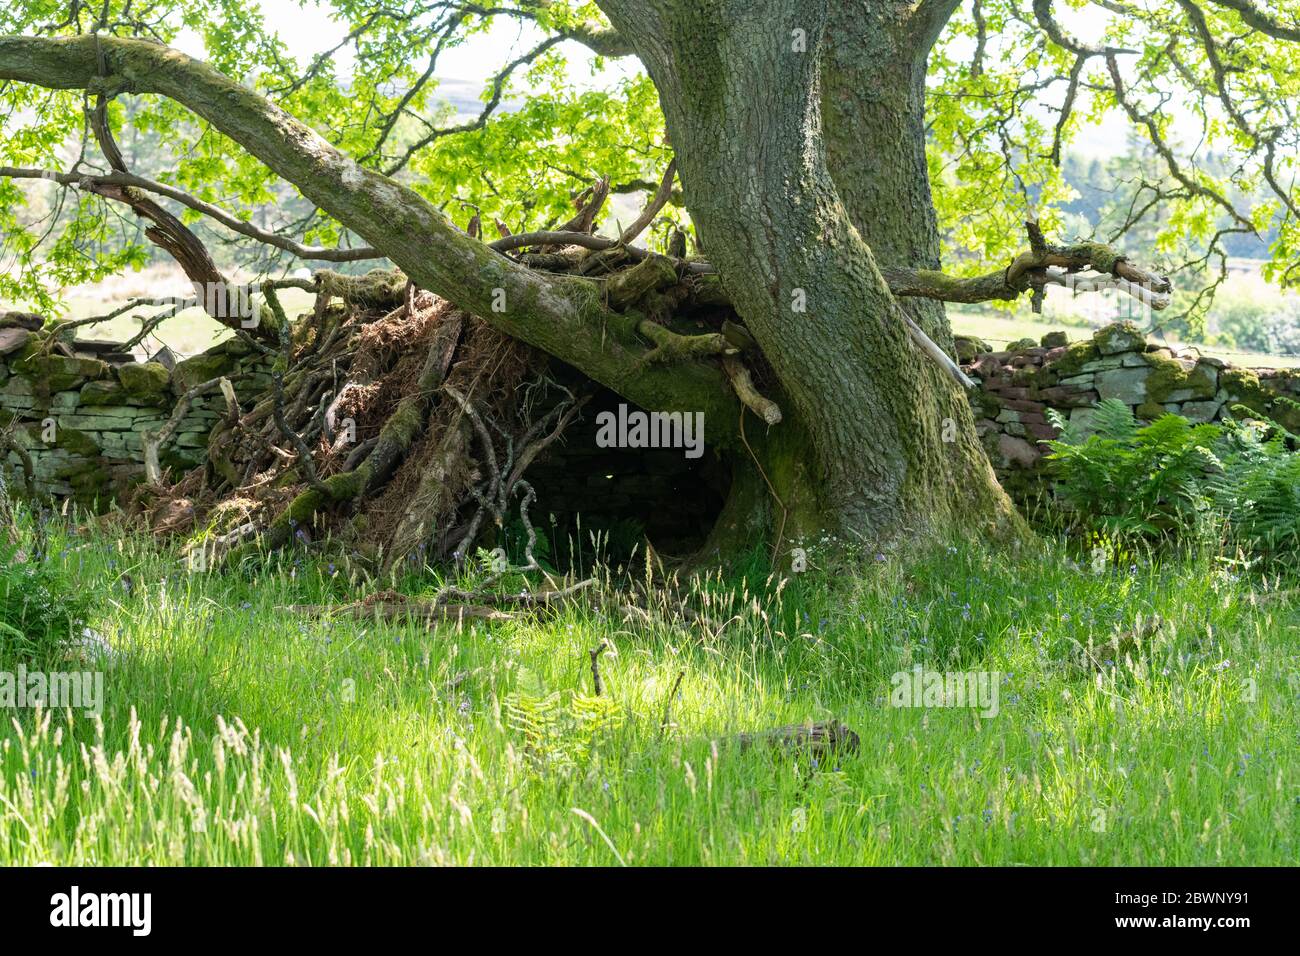 Den on edge of woodland made of sticks, built next to a dry stone wall beneath bough of tree and covered in bracken - UK Stock Photo